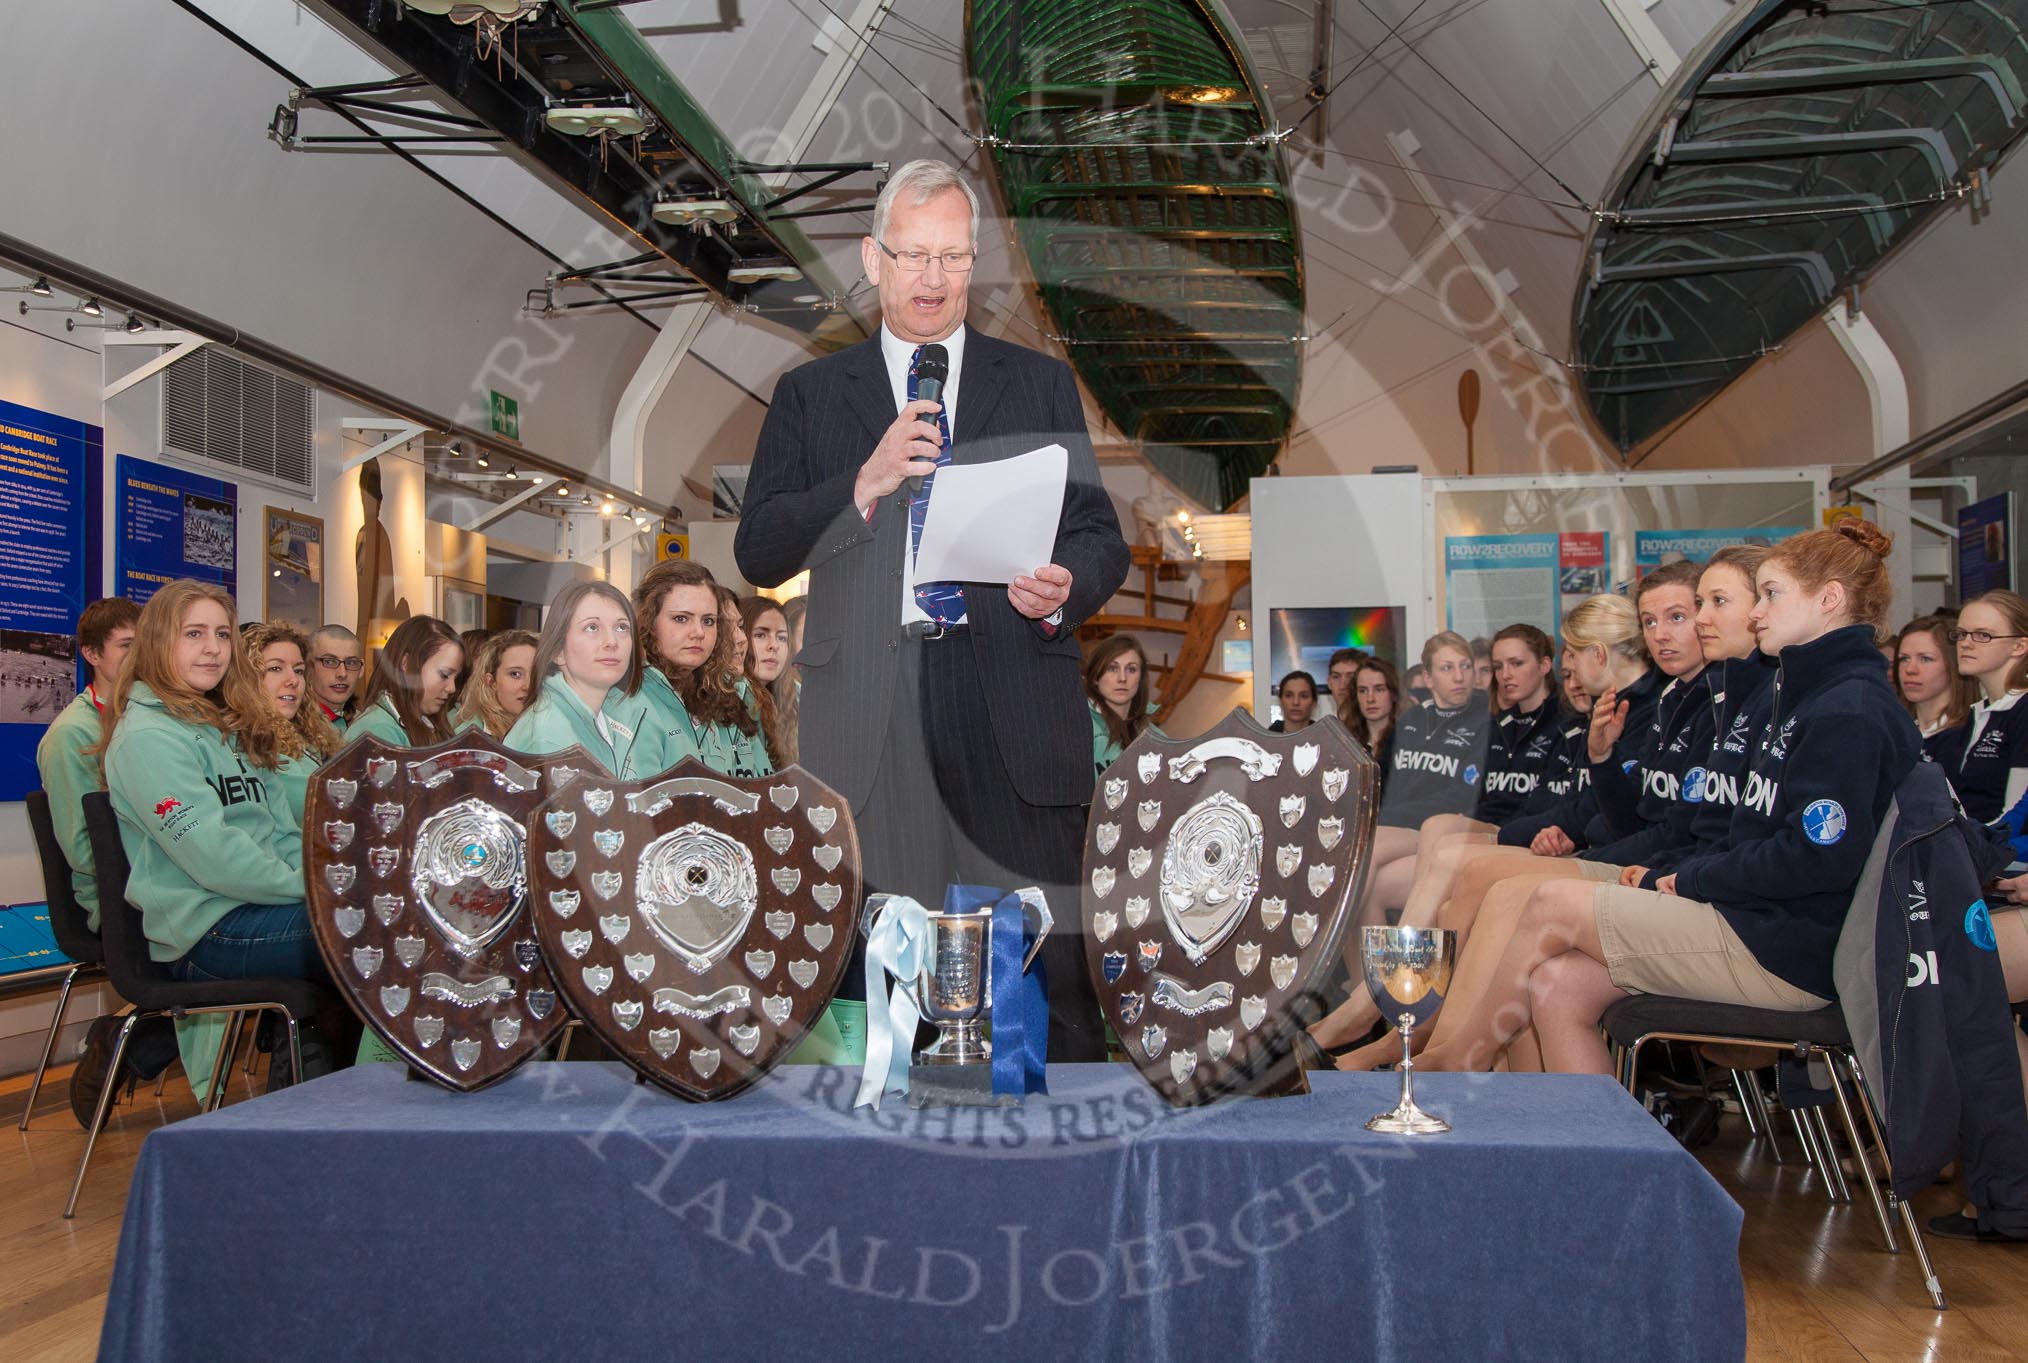 The Boat Race Season 2013 - Henley Boat Races Challenge: Leander Club's Robert Treharne Jones, the "Voice of Rowing", as master of ceremonies at the Henley Boat Races Challenge. In front of him the Henley Boat Races trophies..
River and Rowing Museum,
H,


on 19 March 2013 at 11:01, image #15